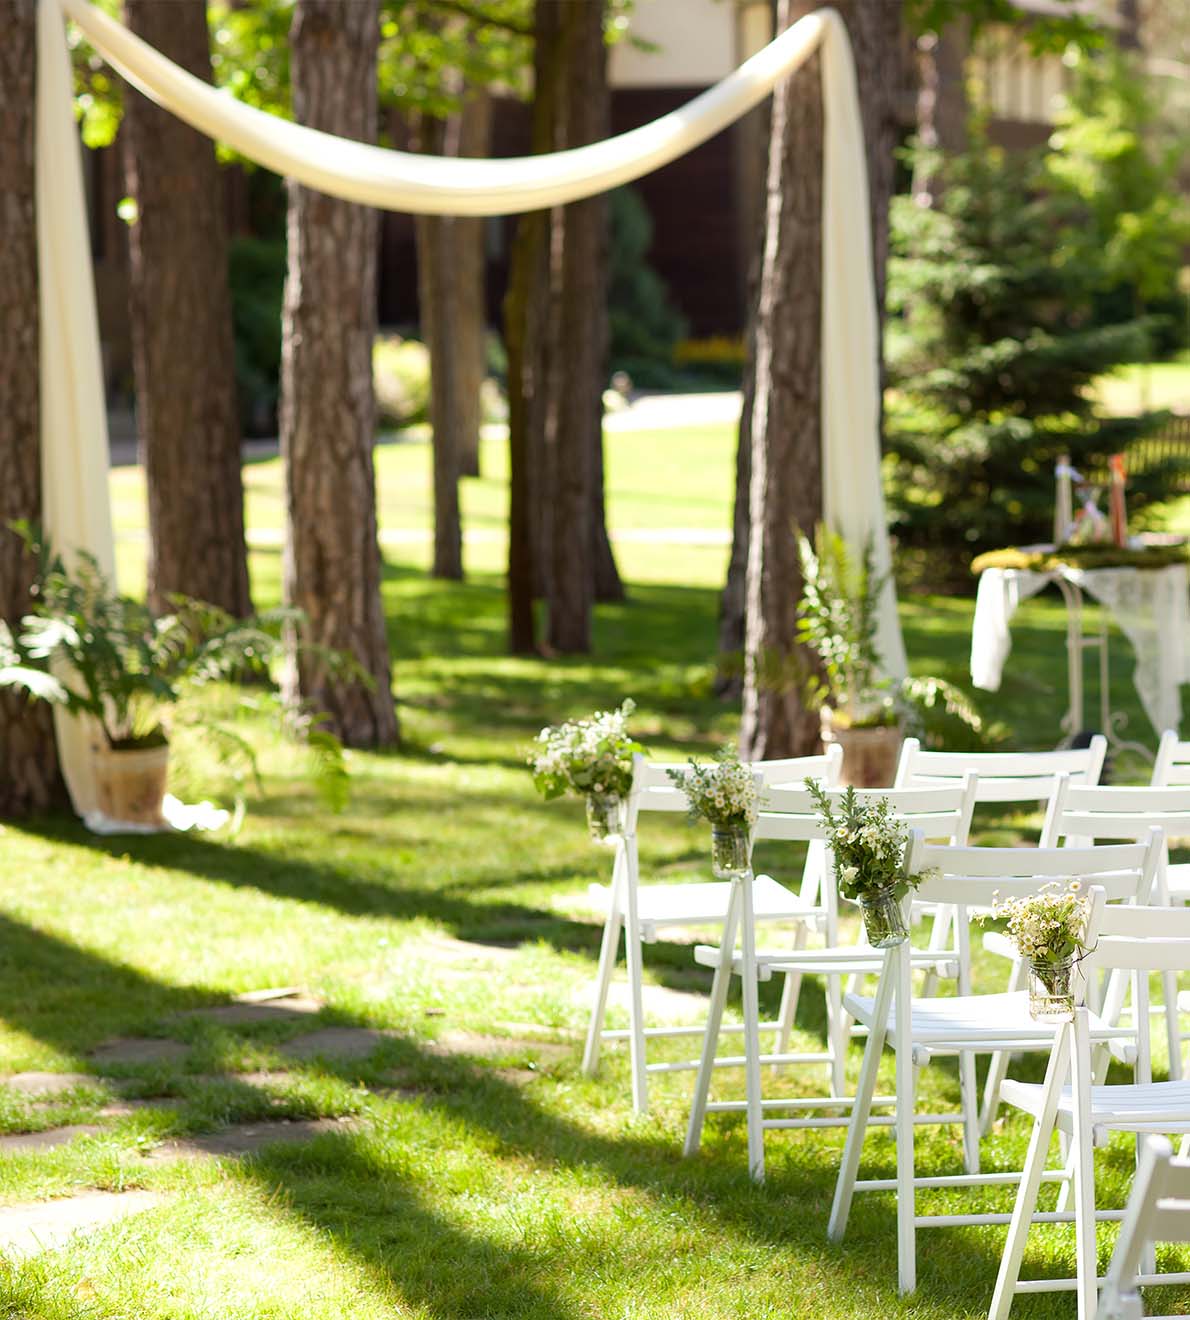 Image of arranged chairs in a park setting for an outdoor wedding